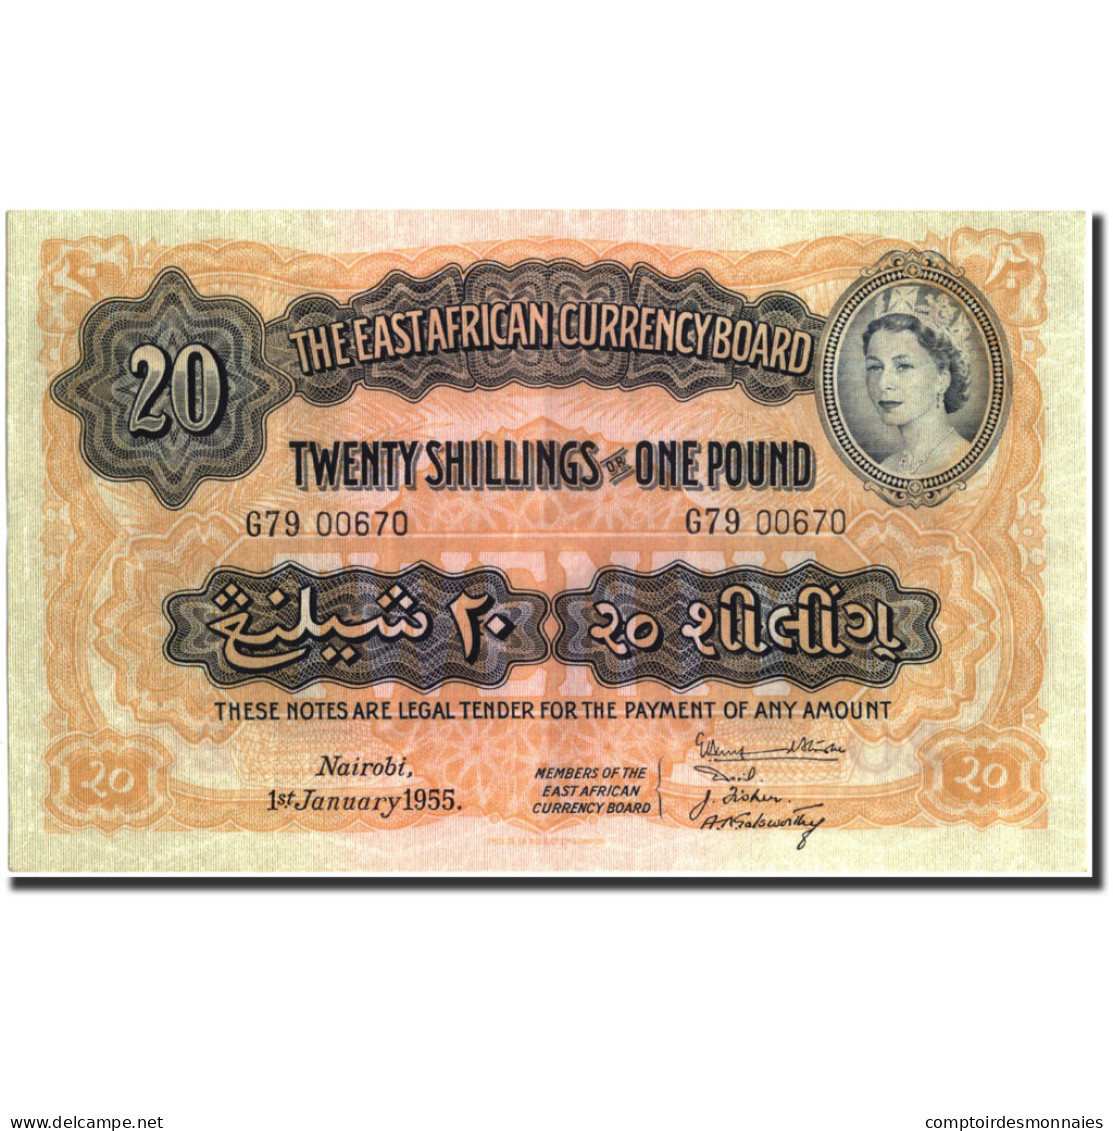 Billet, EAST AFRICA, 20 Shillings = 1 Pound, 1955, 1955-01-01, KM:35, SUP+ - Kenia